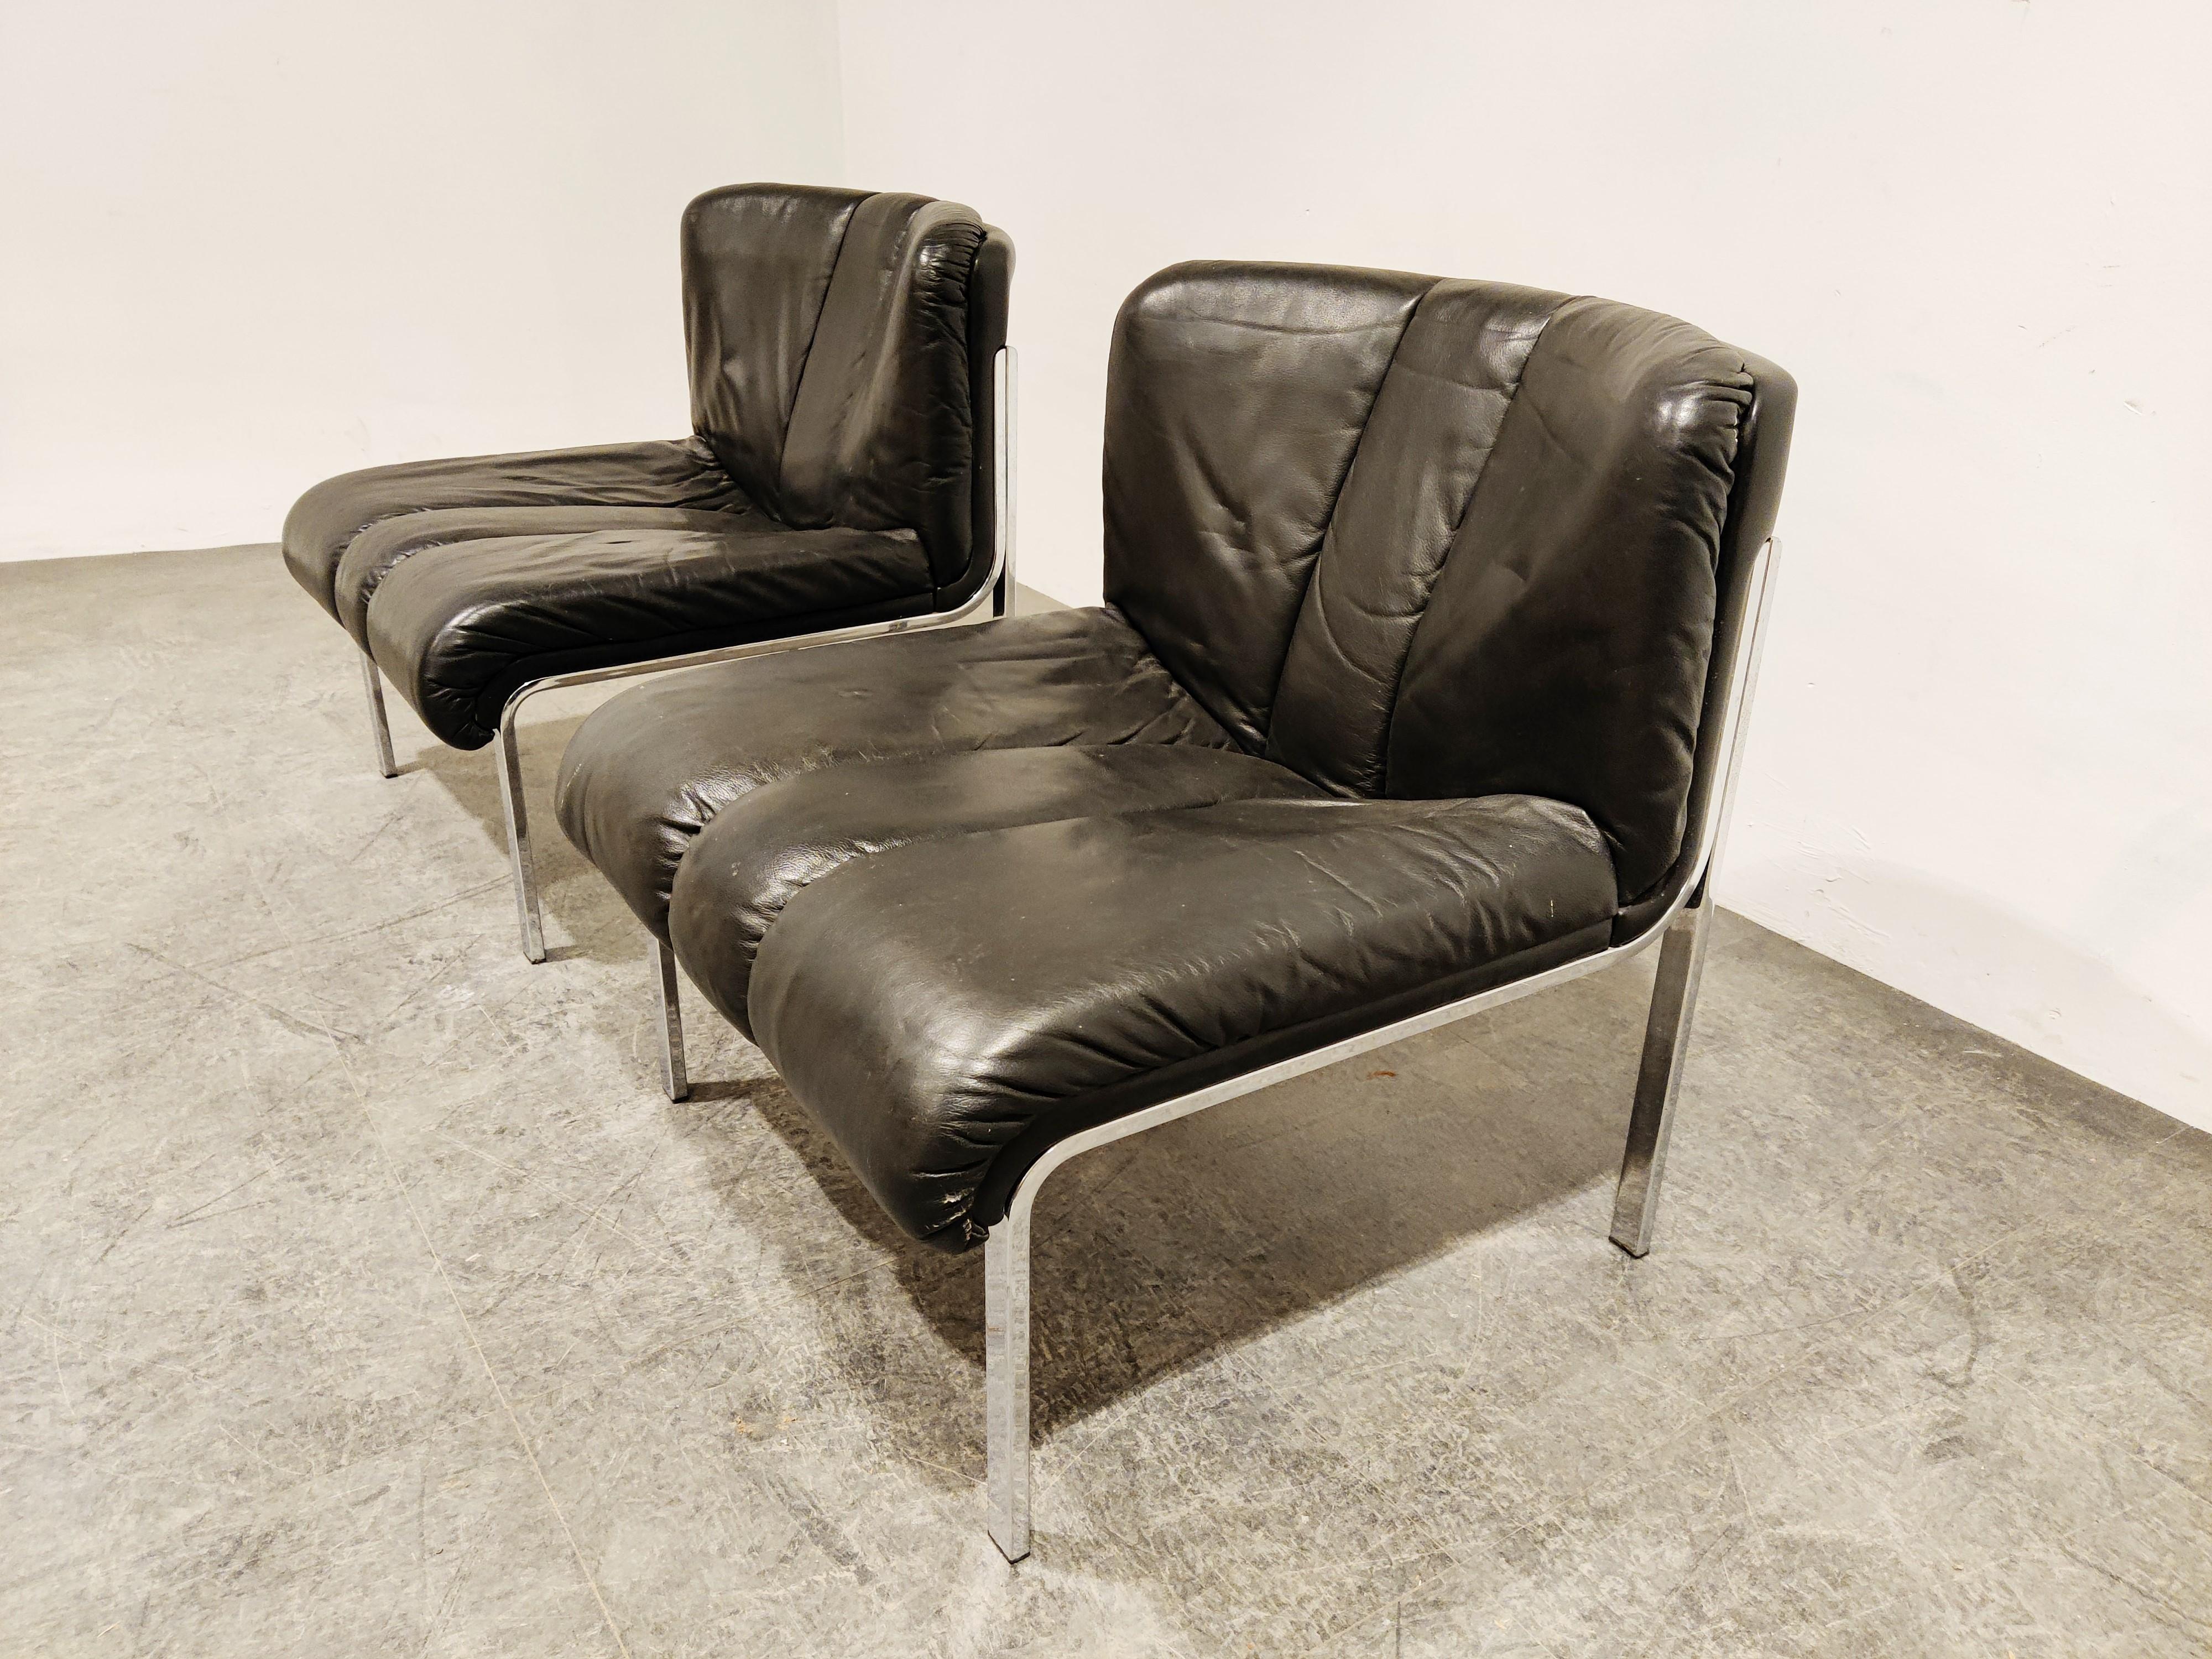 German Vintage Leather and Chrome Eurochair Lounge Chairs by Girsberger, 1970s